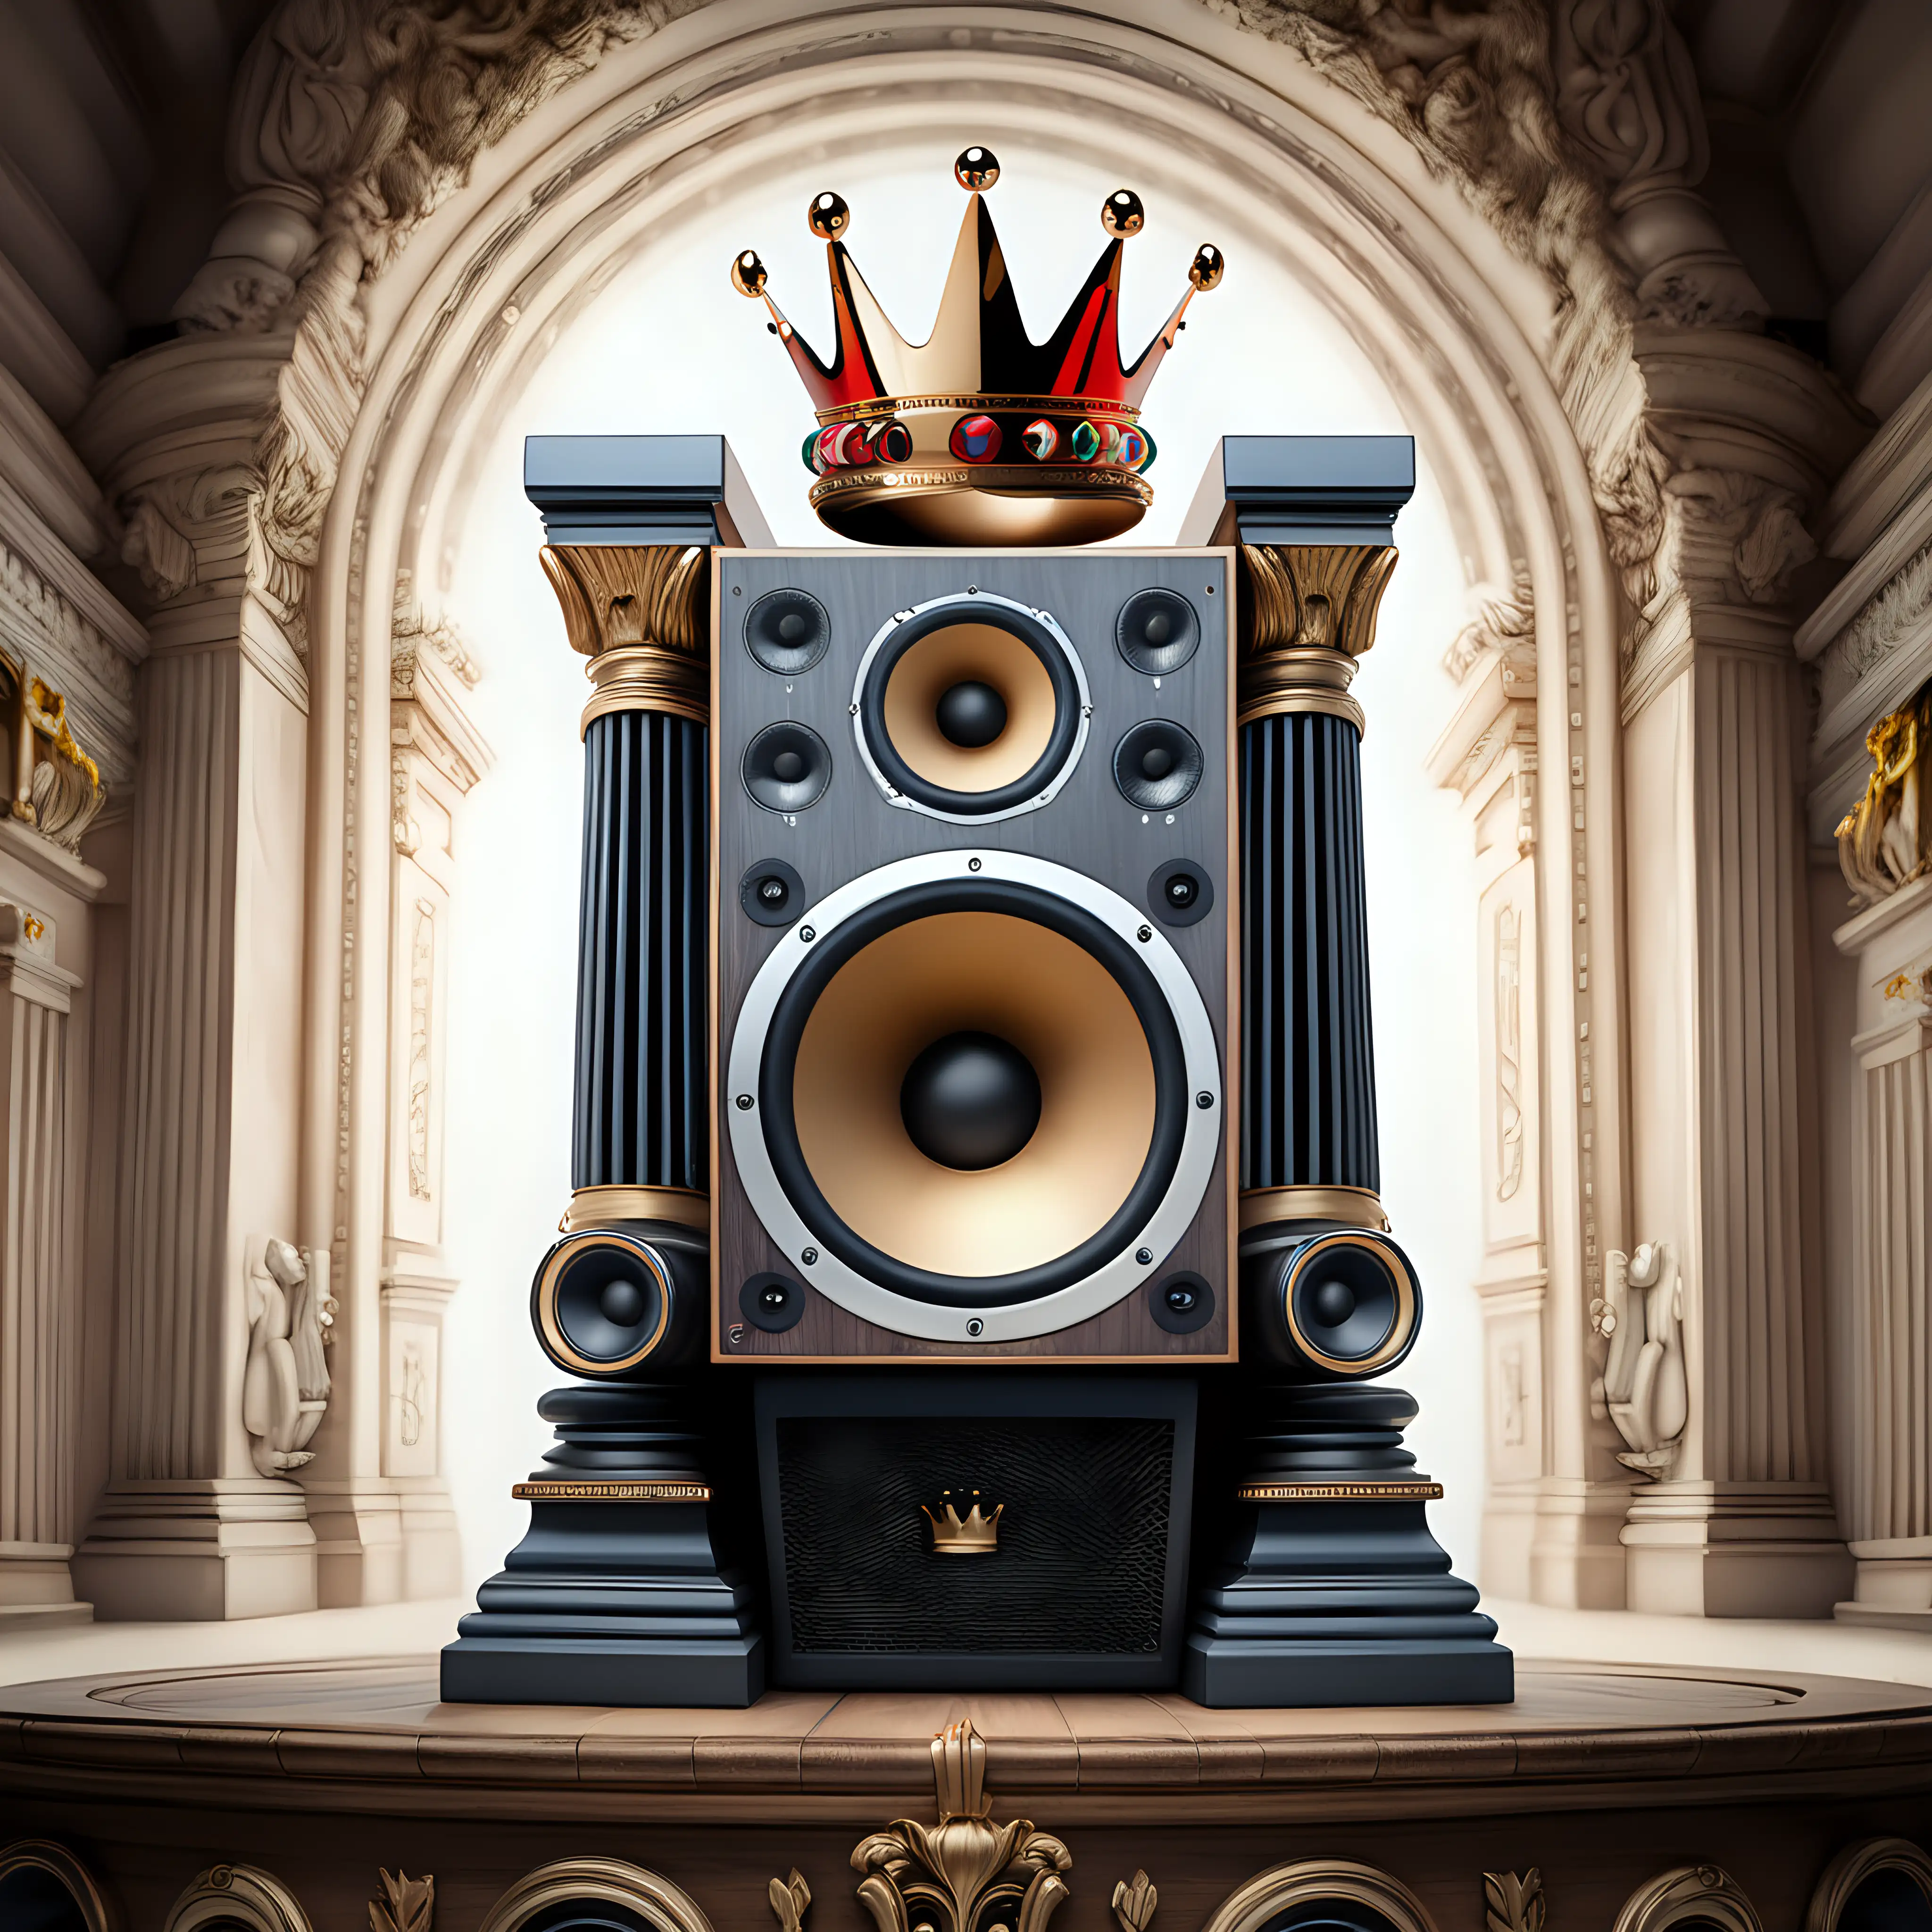 Majestic Throne of Miniature Speakers with Crown